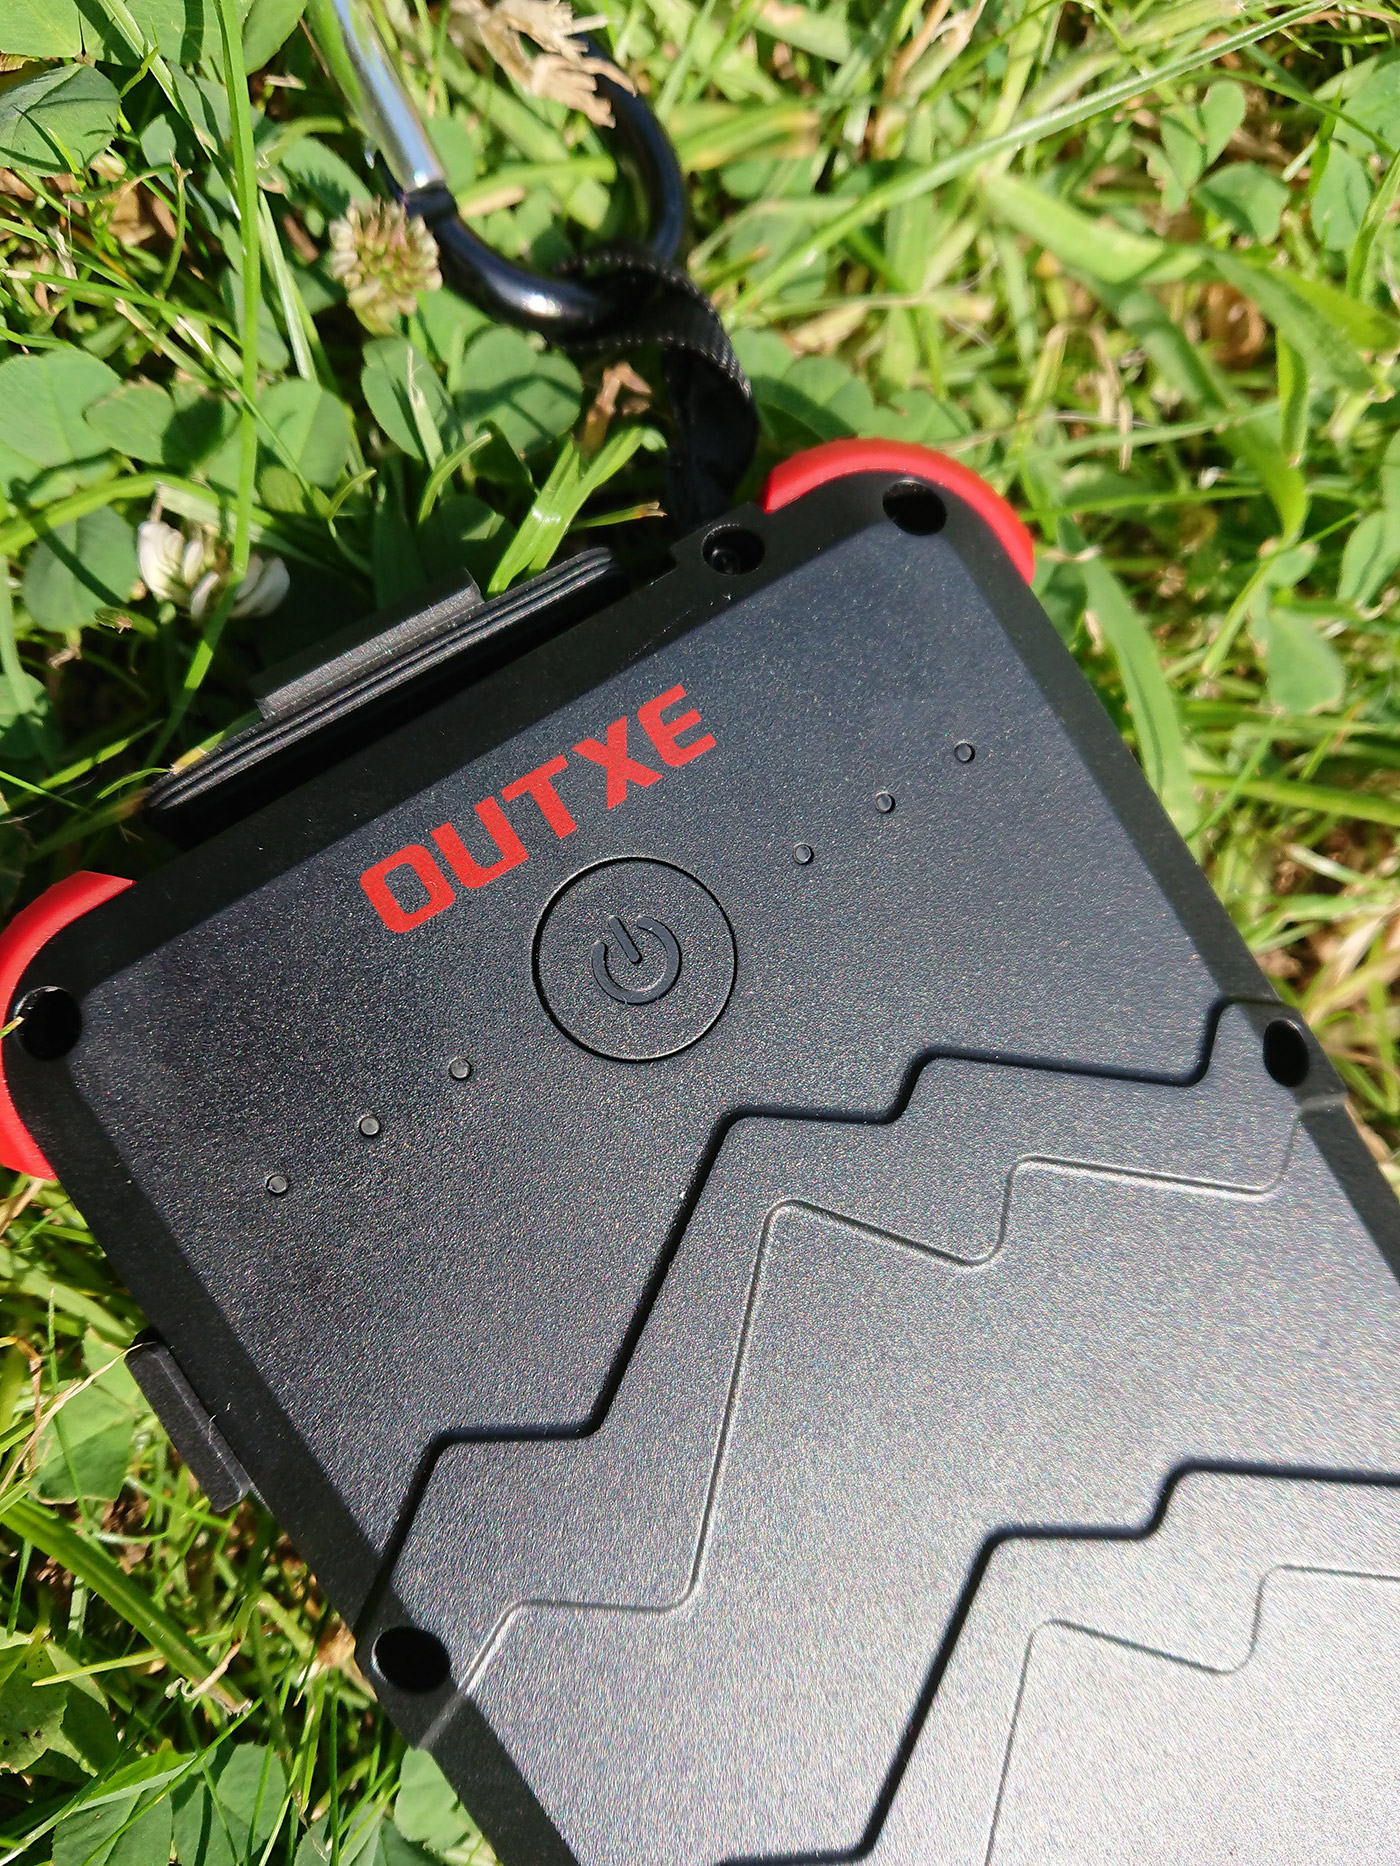 OUTEX Rugged Power Bank